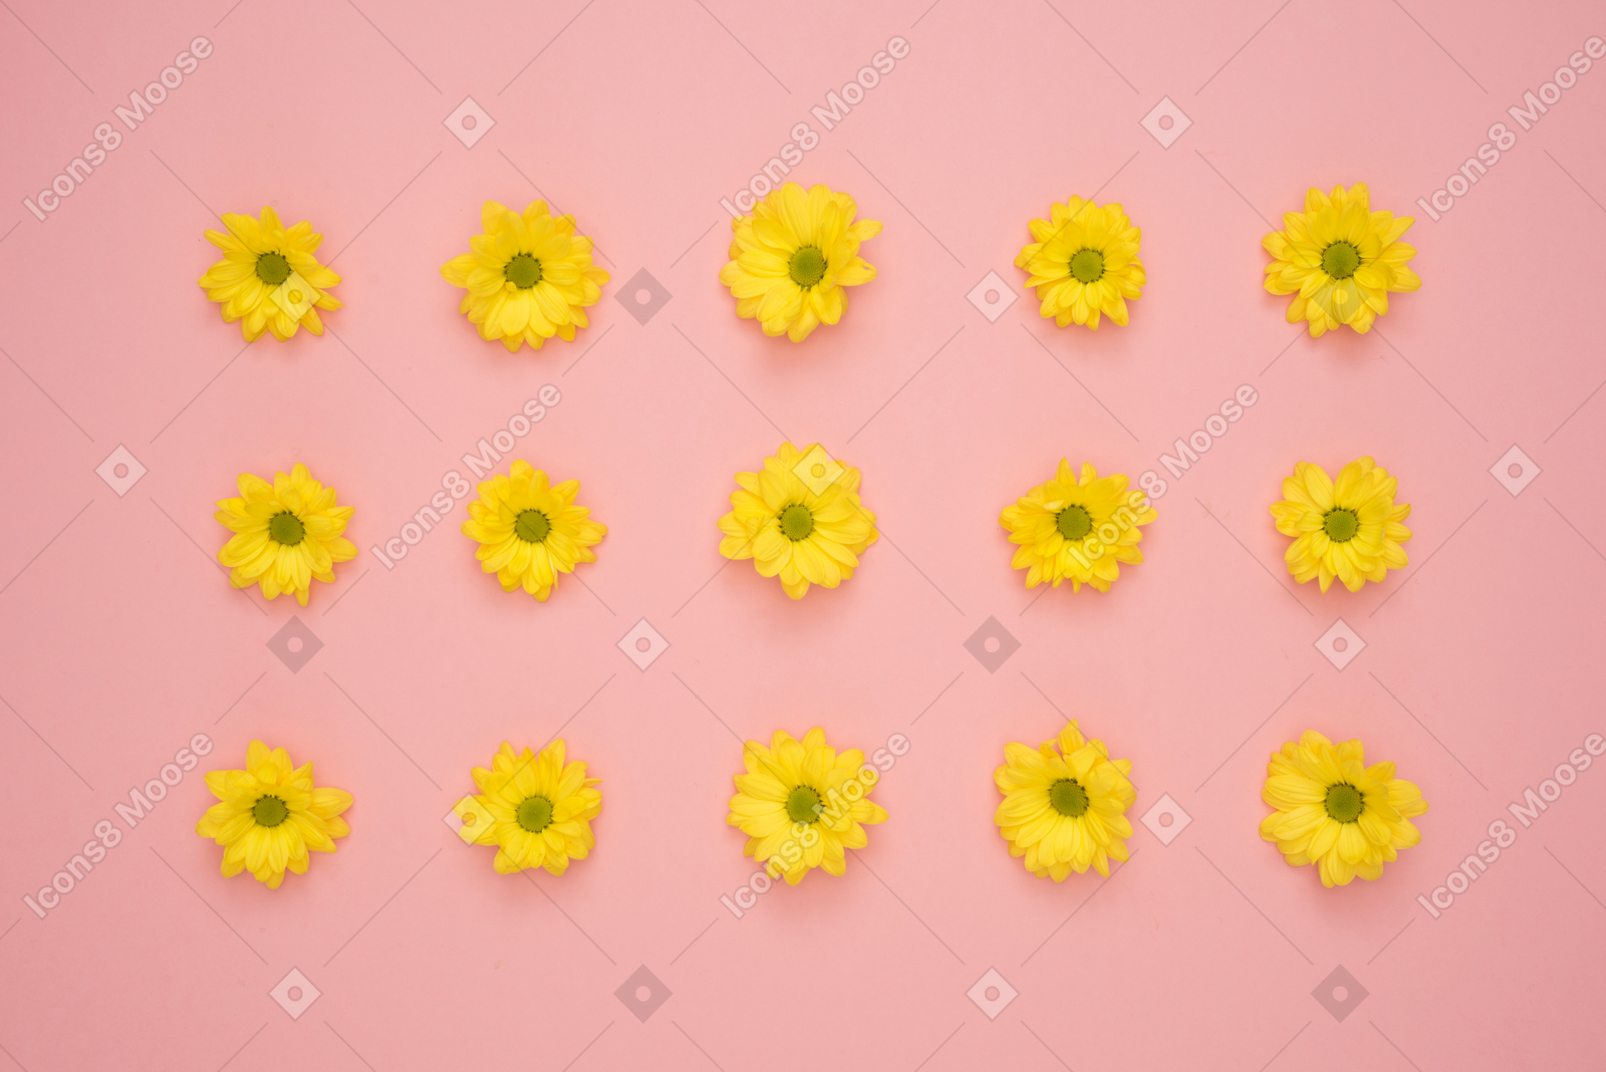 Flowers with yellow petals and green center